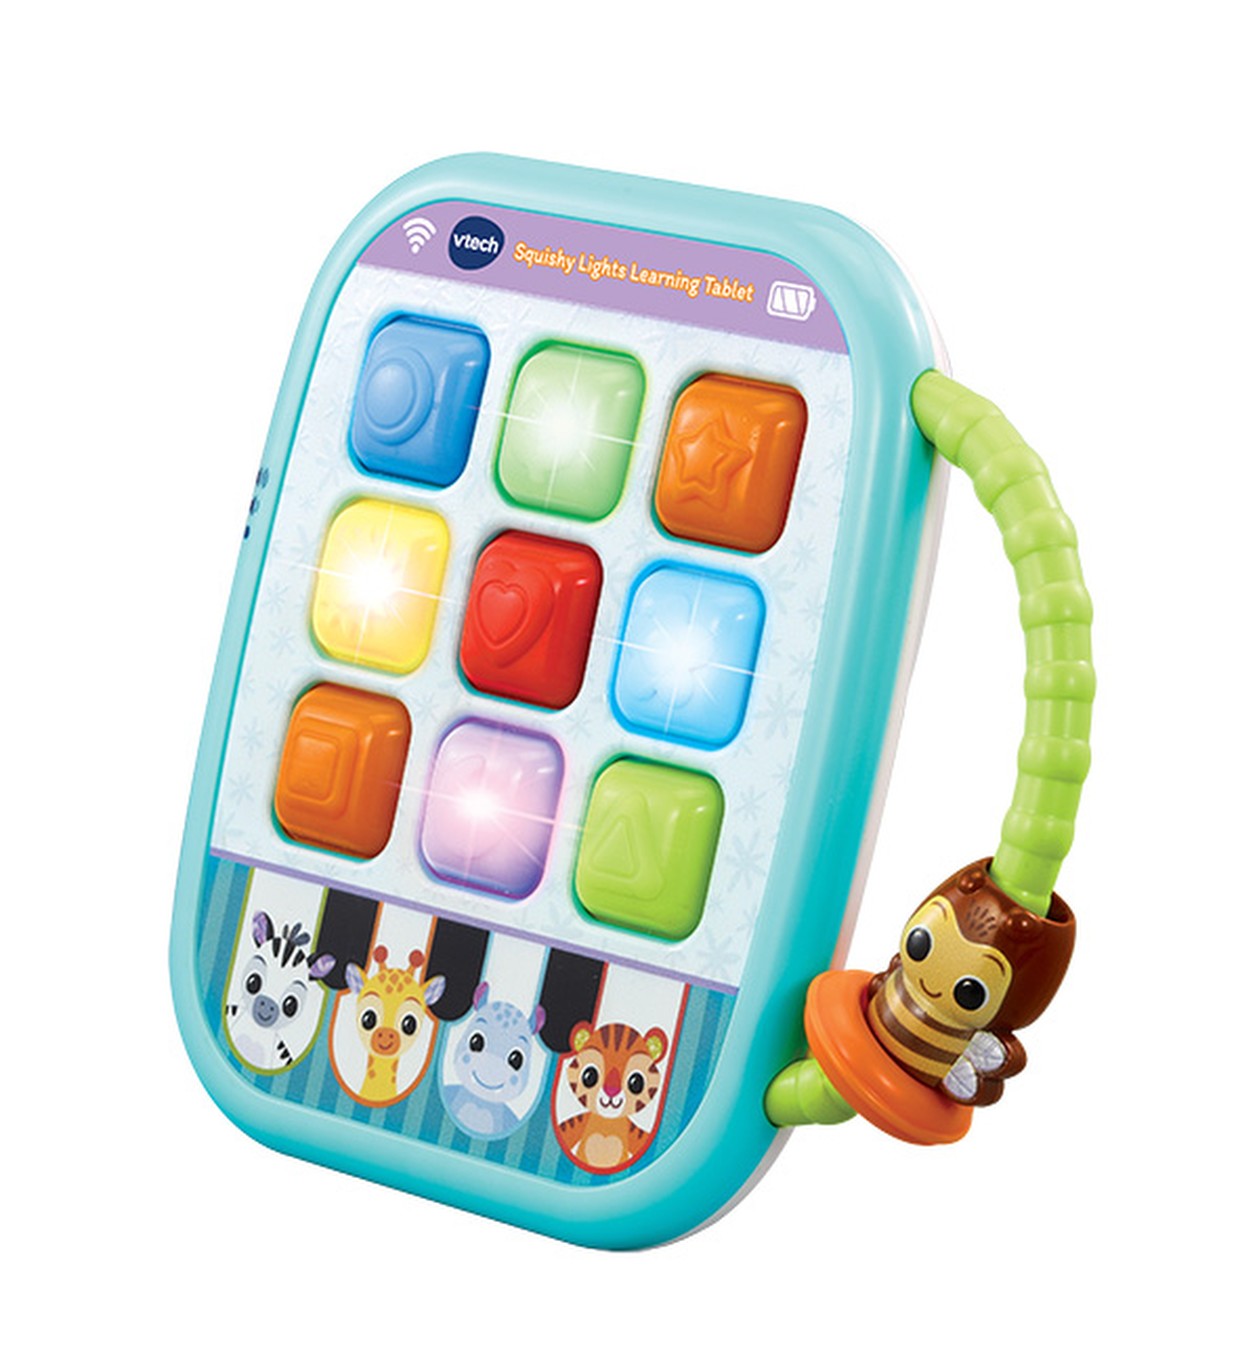 VTech, Little Apps Tablet, Tablet for Toddlers, Learning Toy 8 Learning  Activity